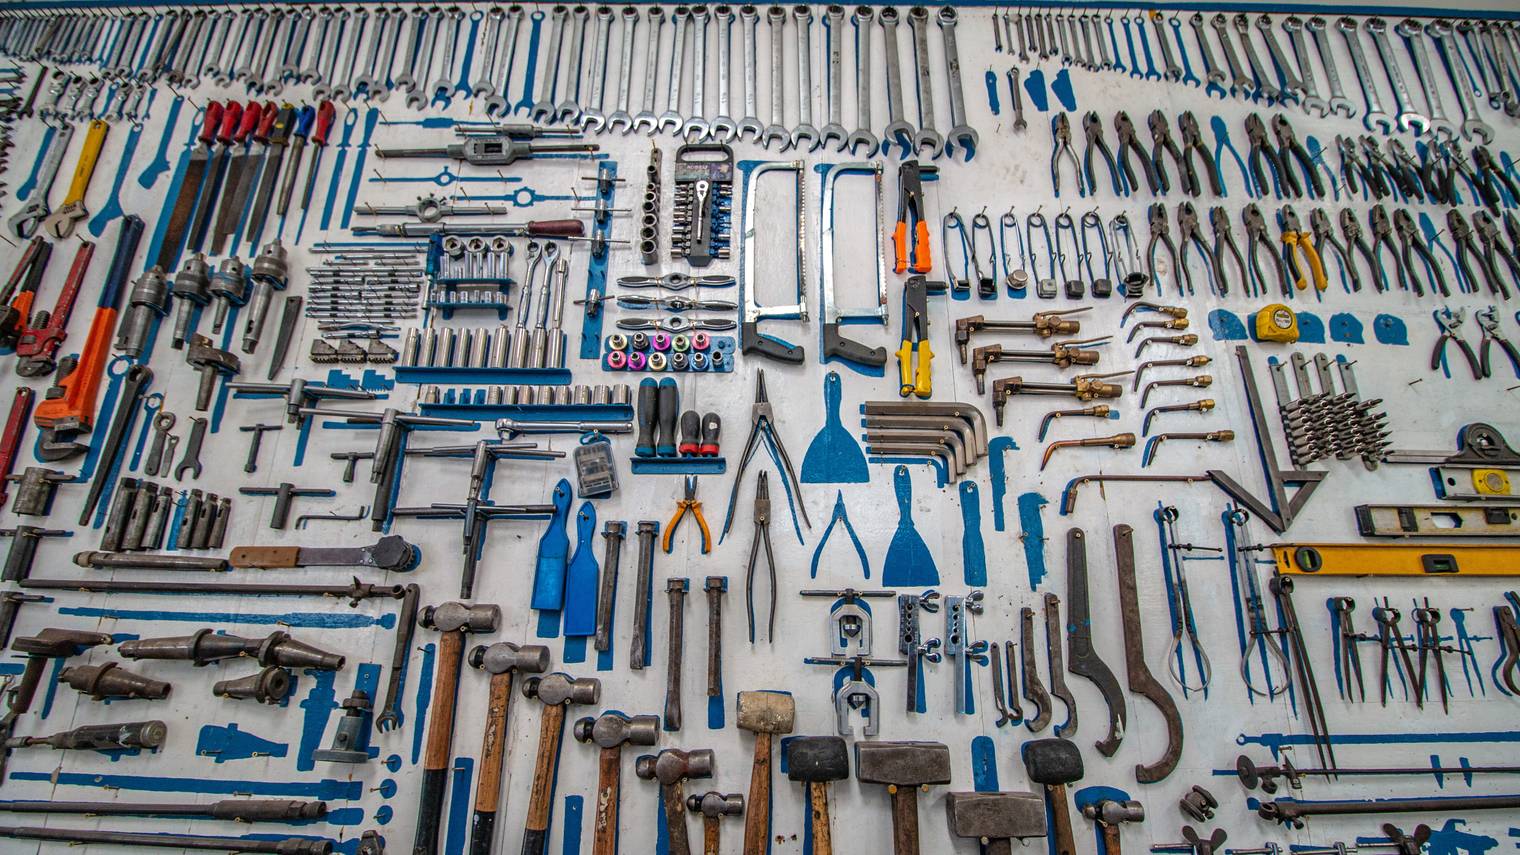 Lots of tools neatly arranged